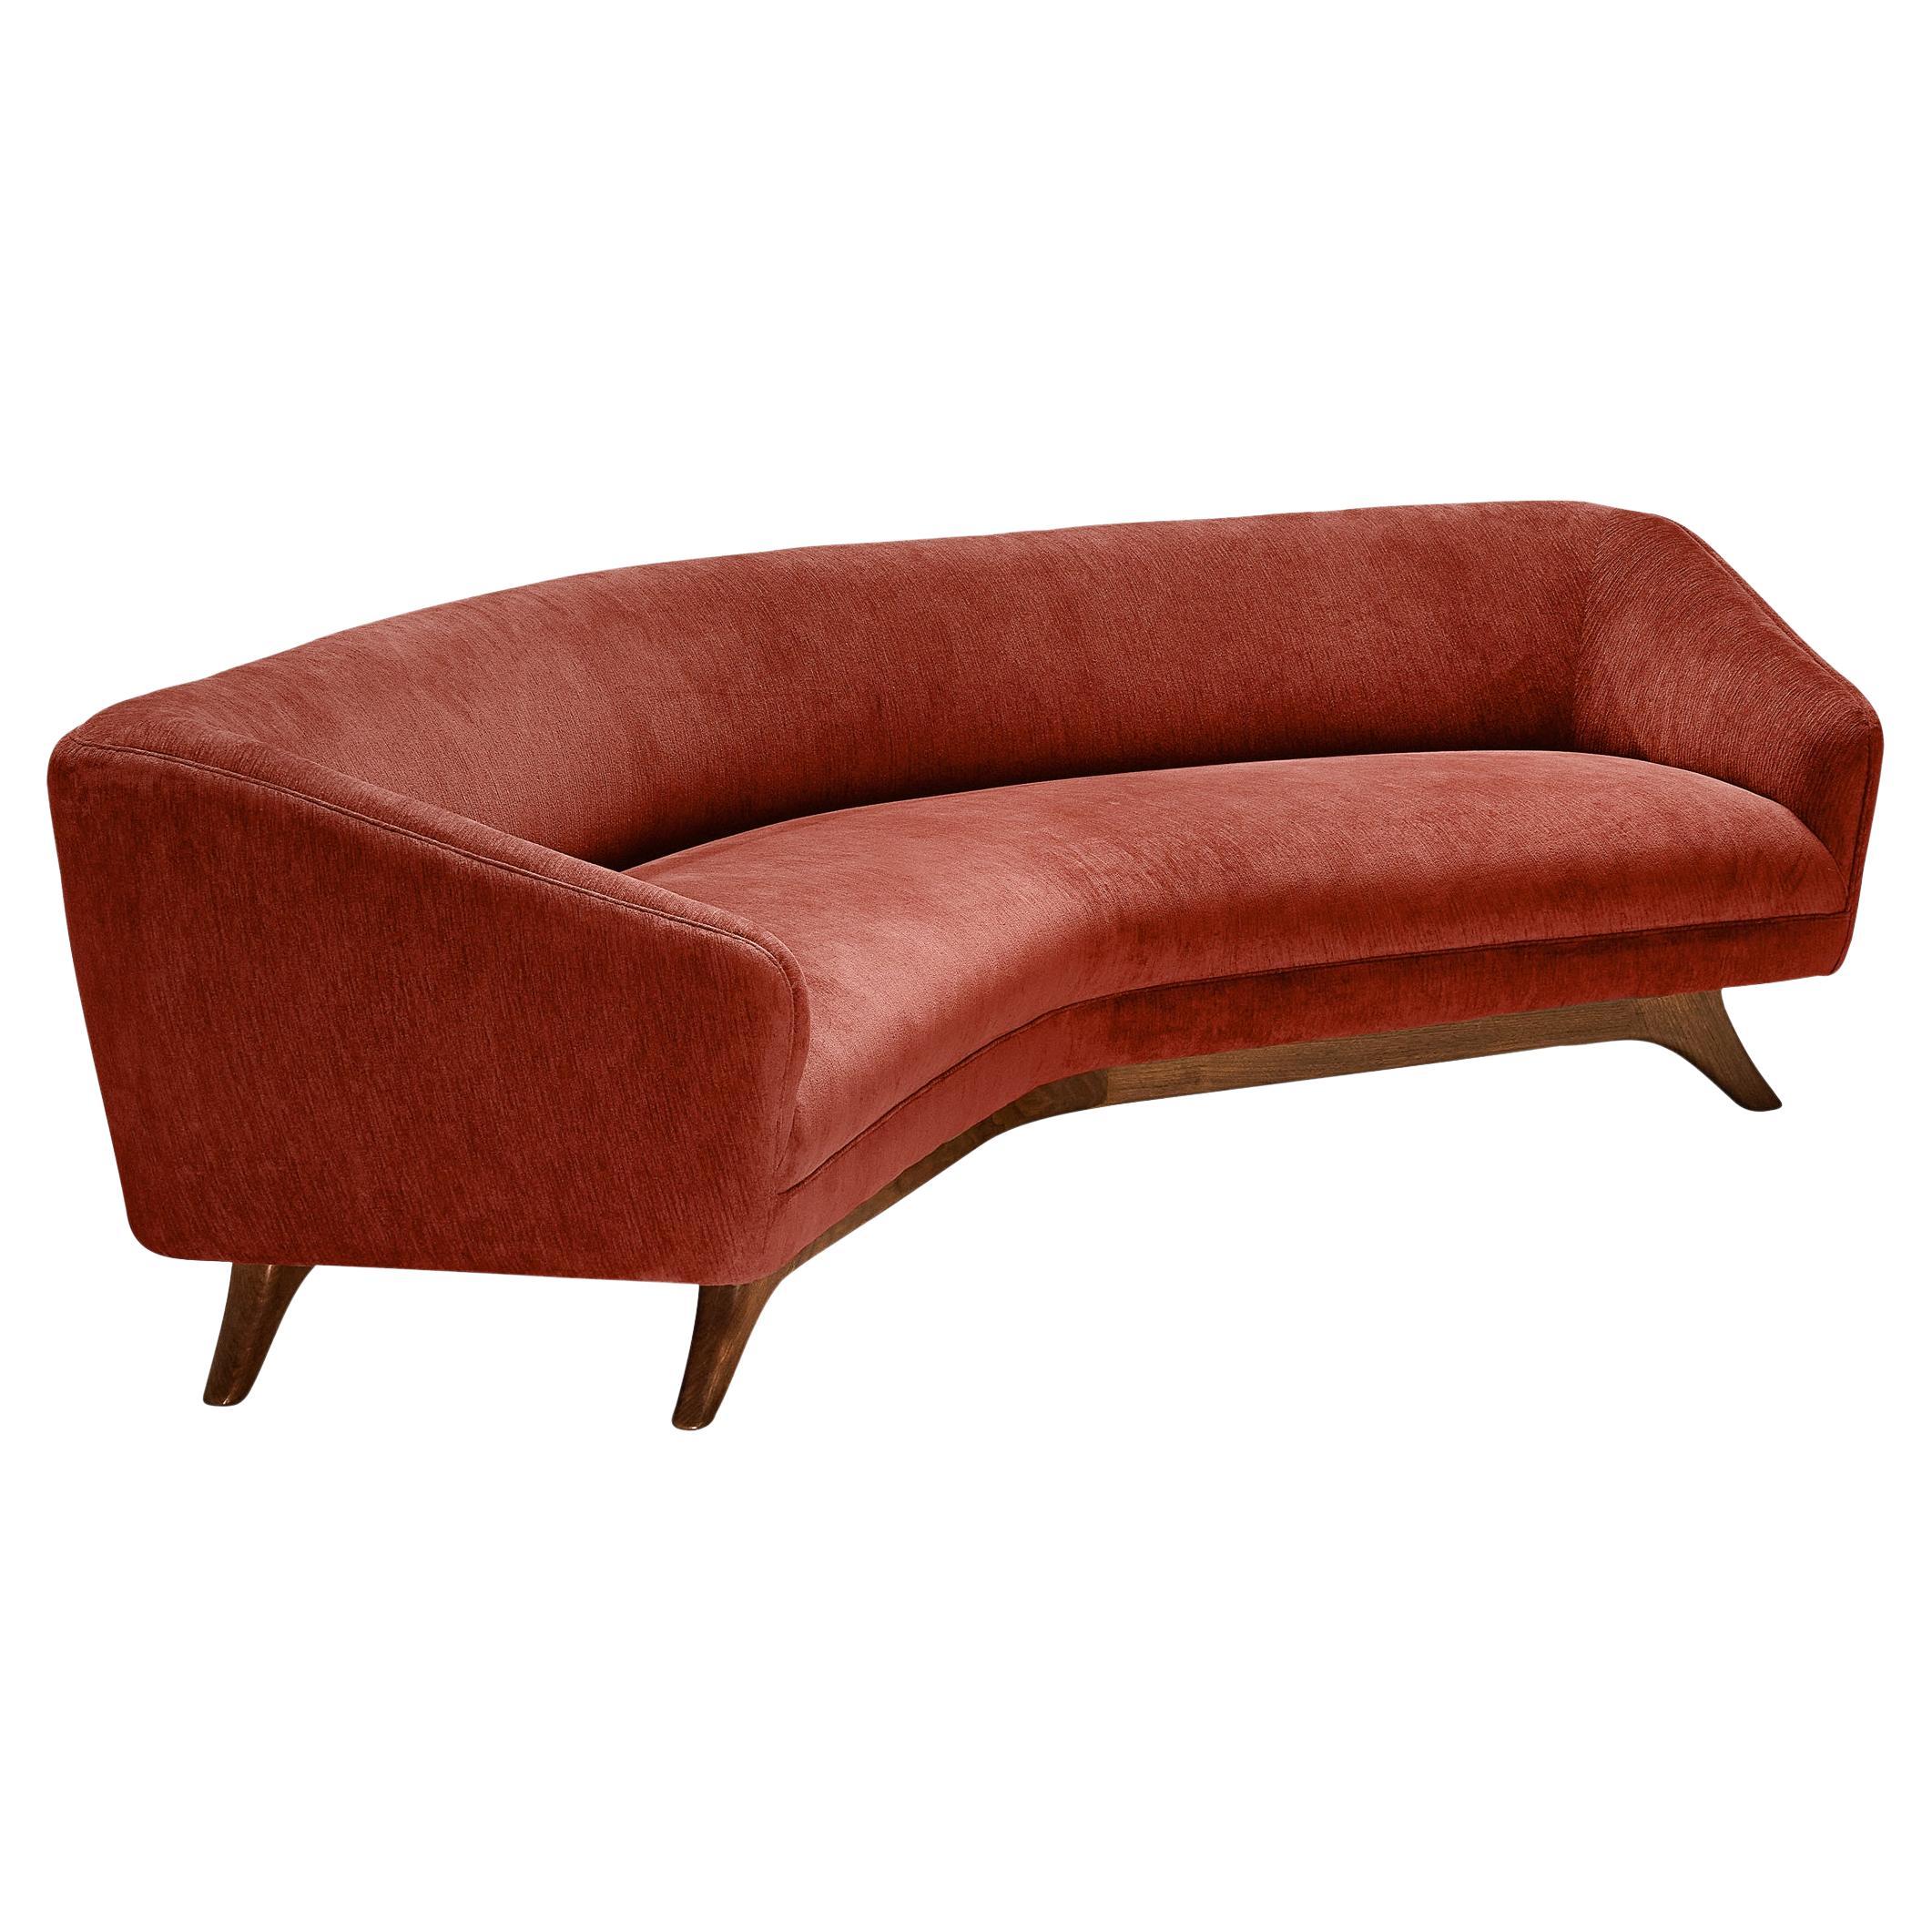 Vladimir Kagan 'Wide Angle' Sofa in Red Brown Upholstery and Walnut  For Sale